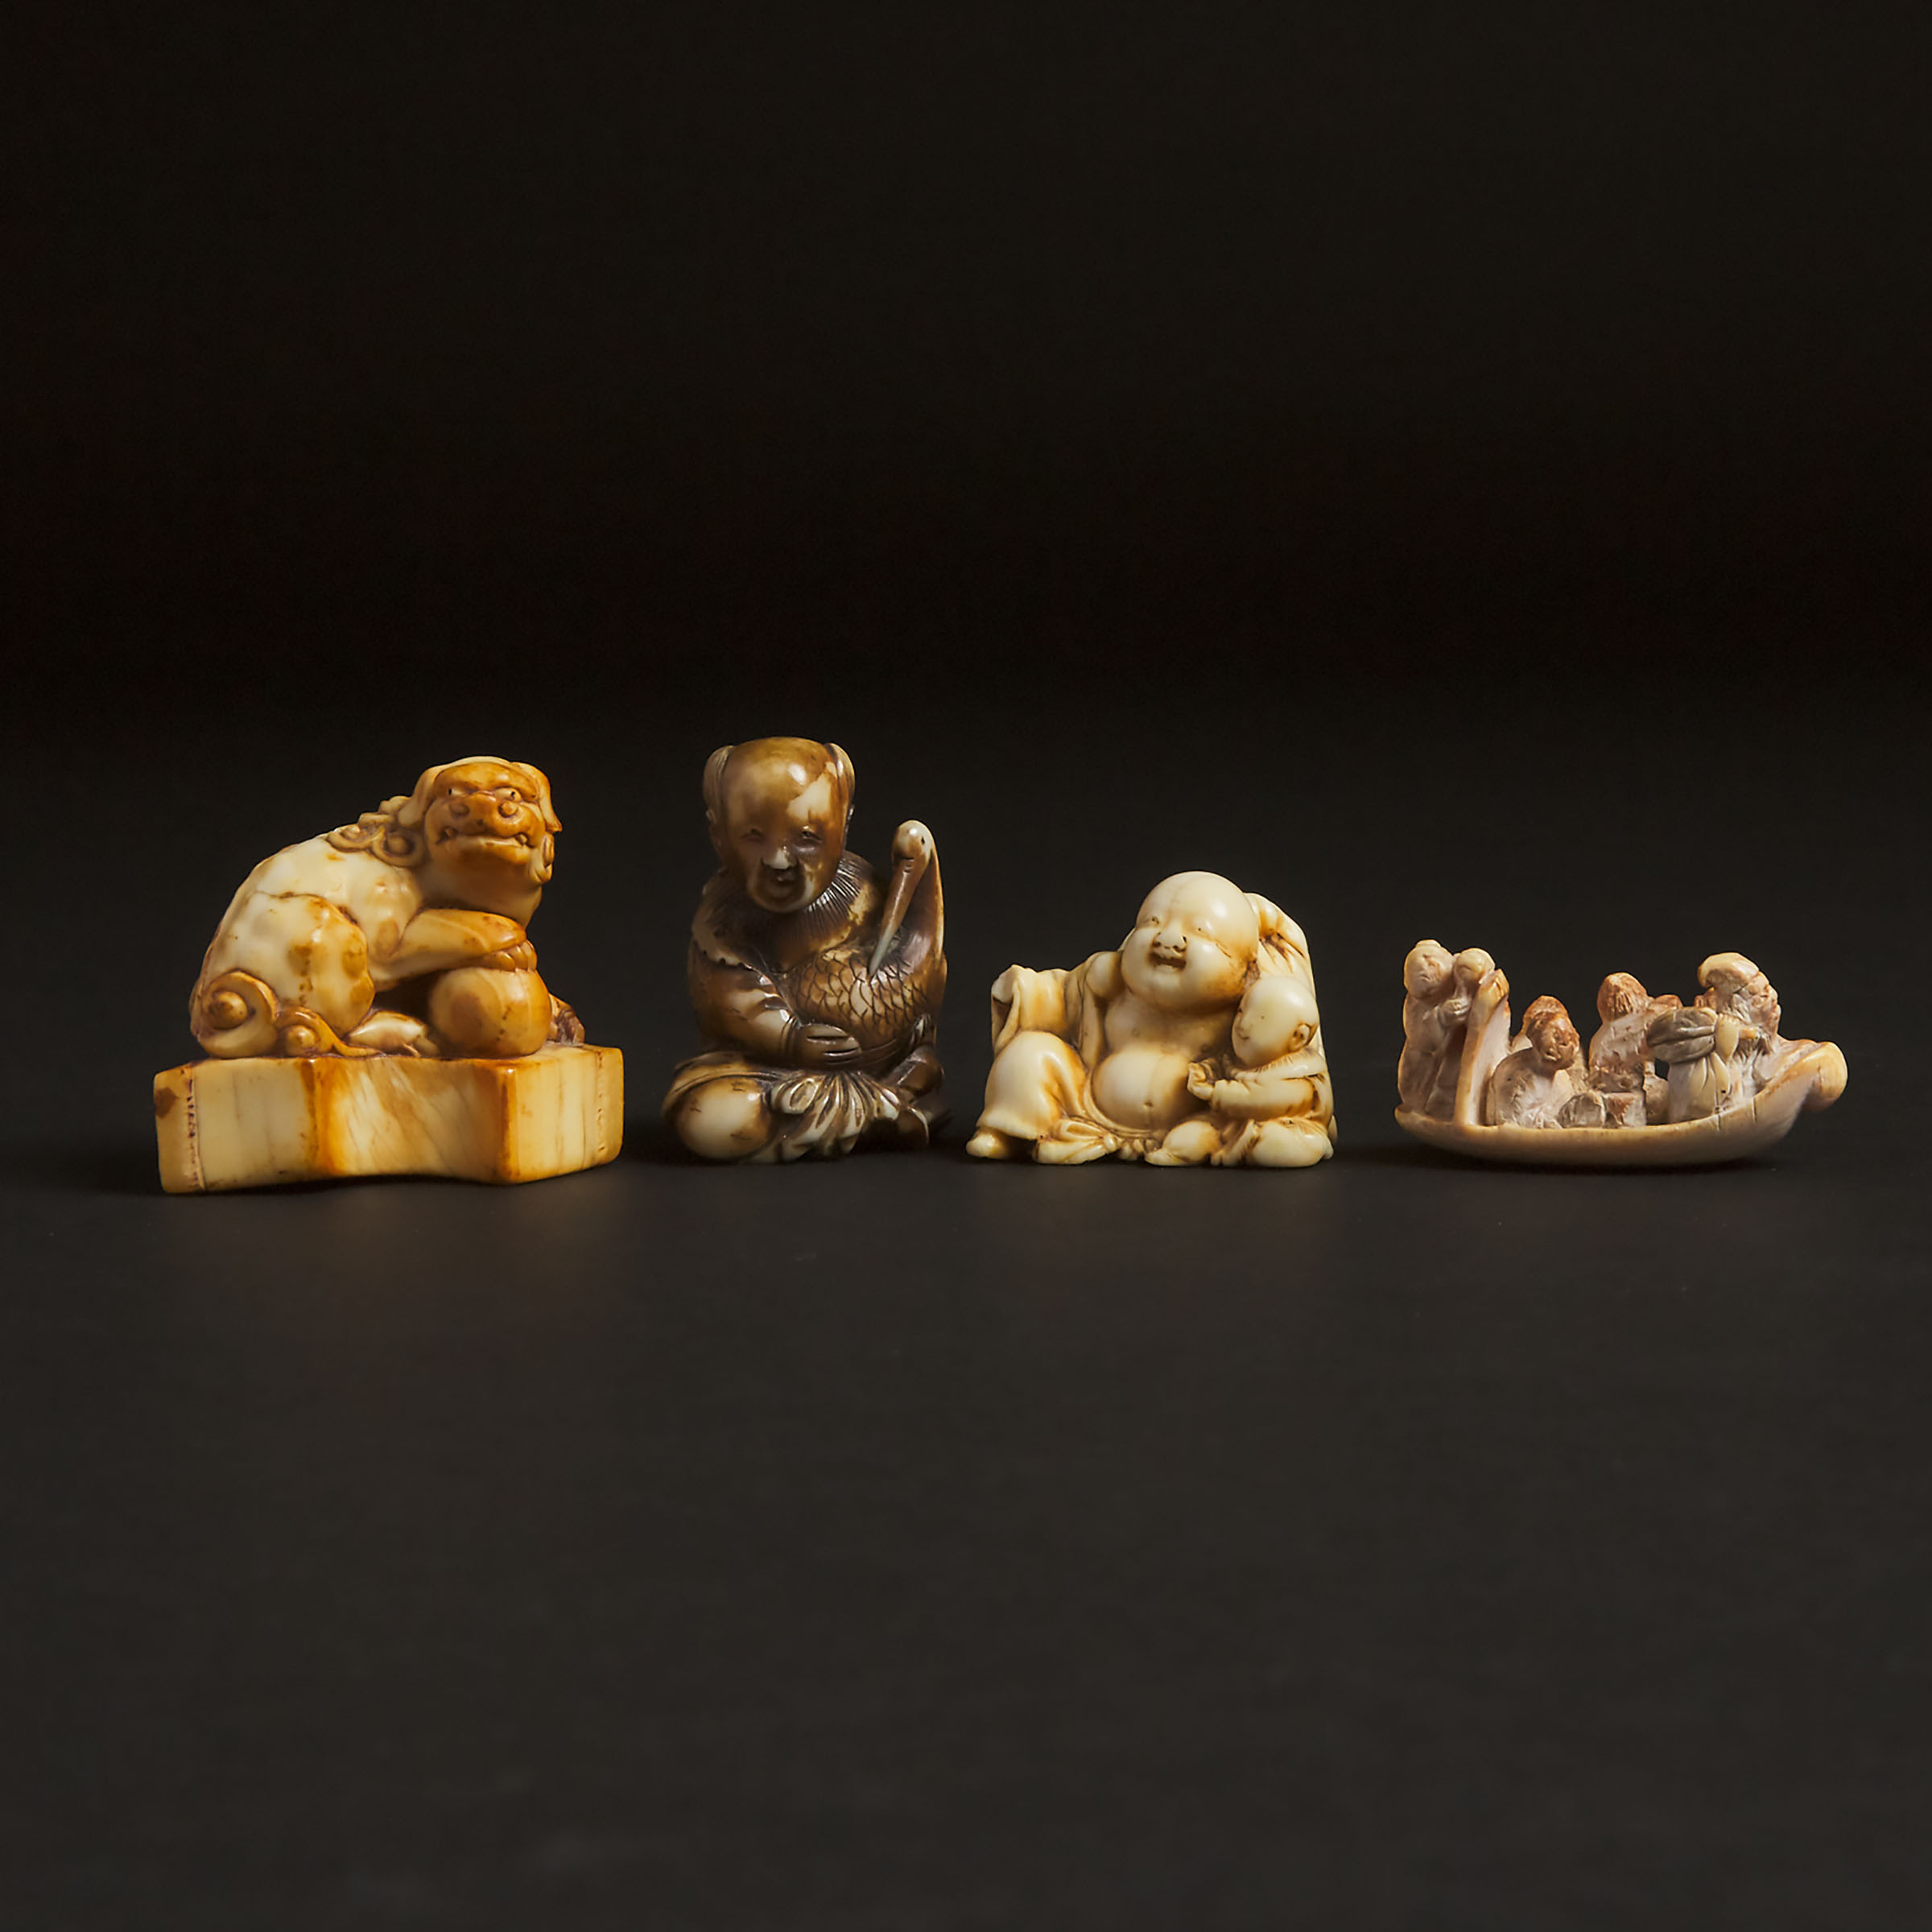 A Group of Four Ivory and Bone Carvings, 18th century and Later